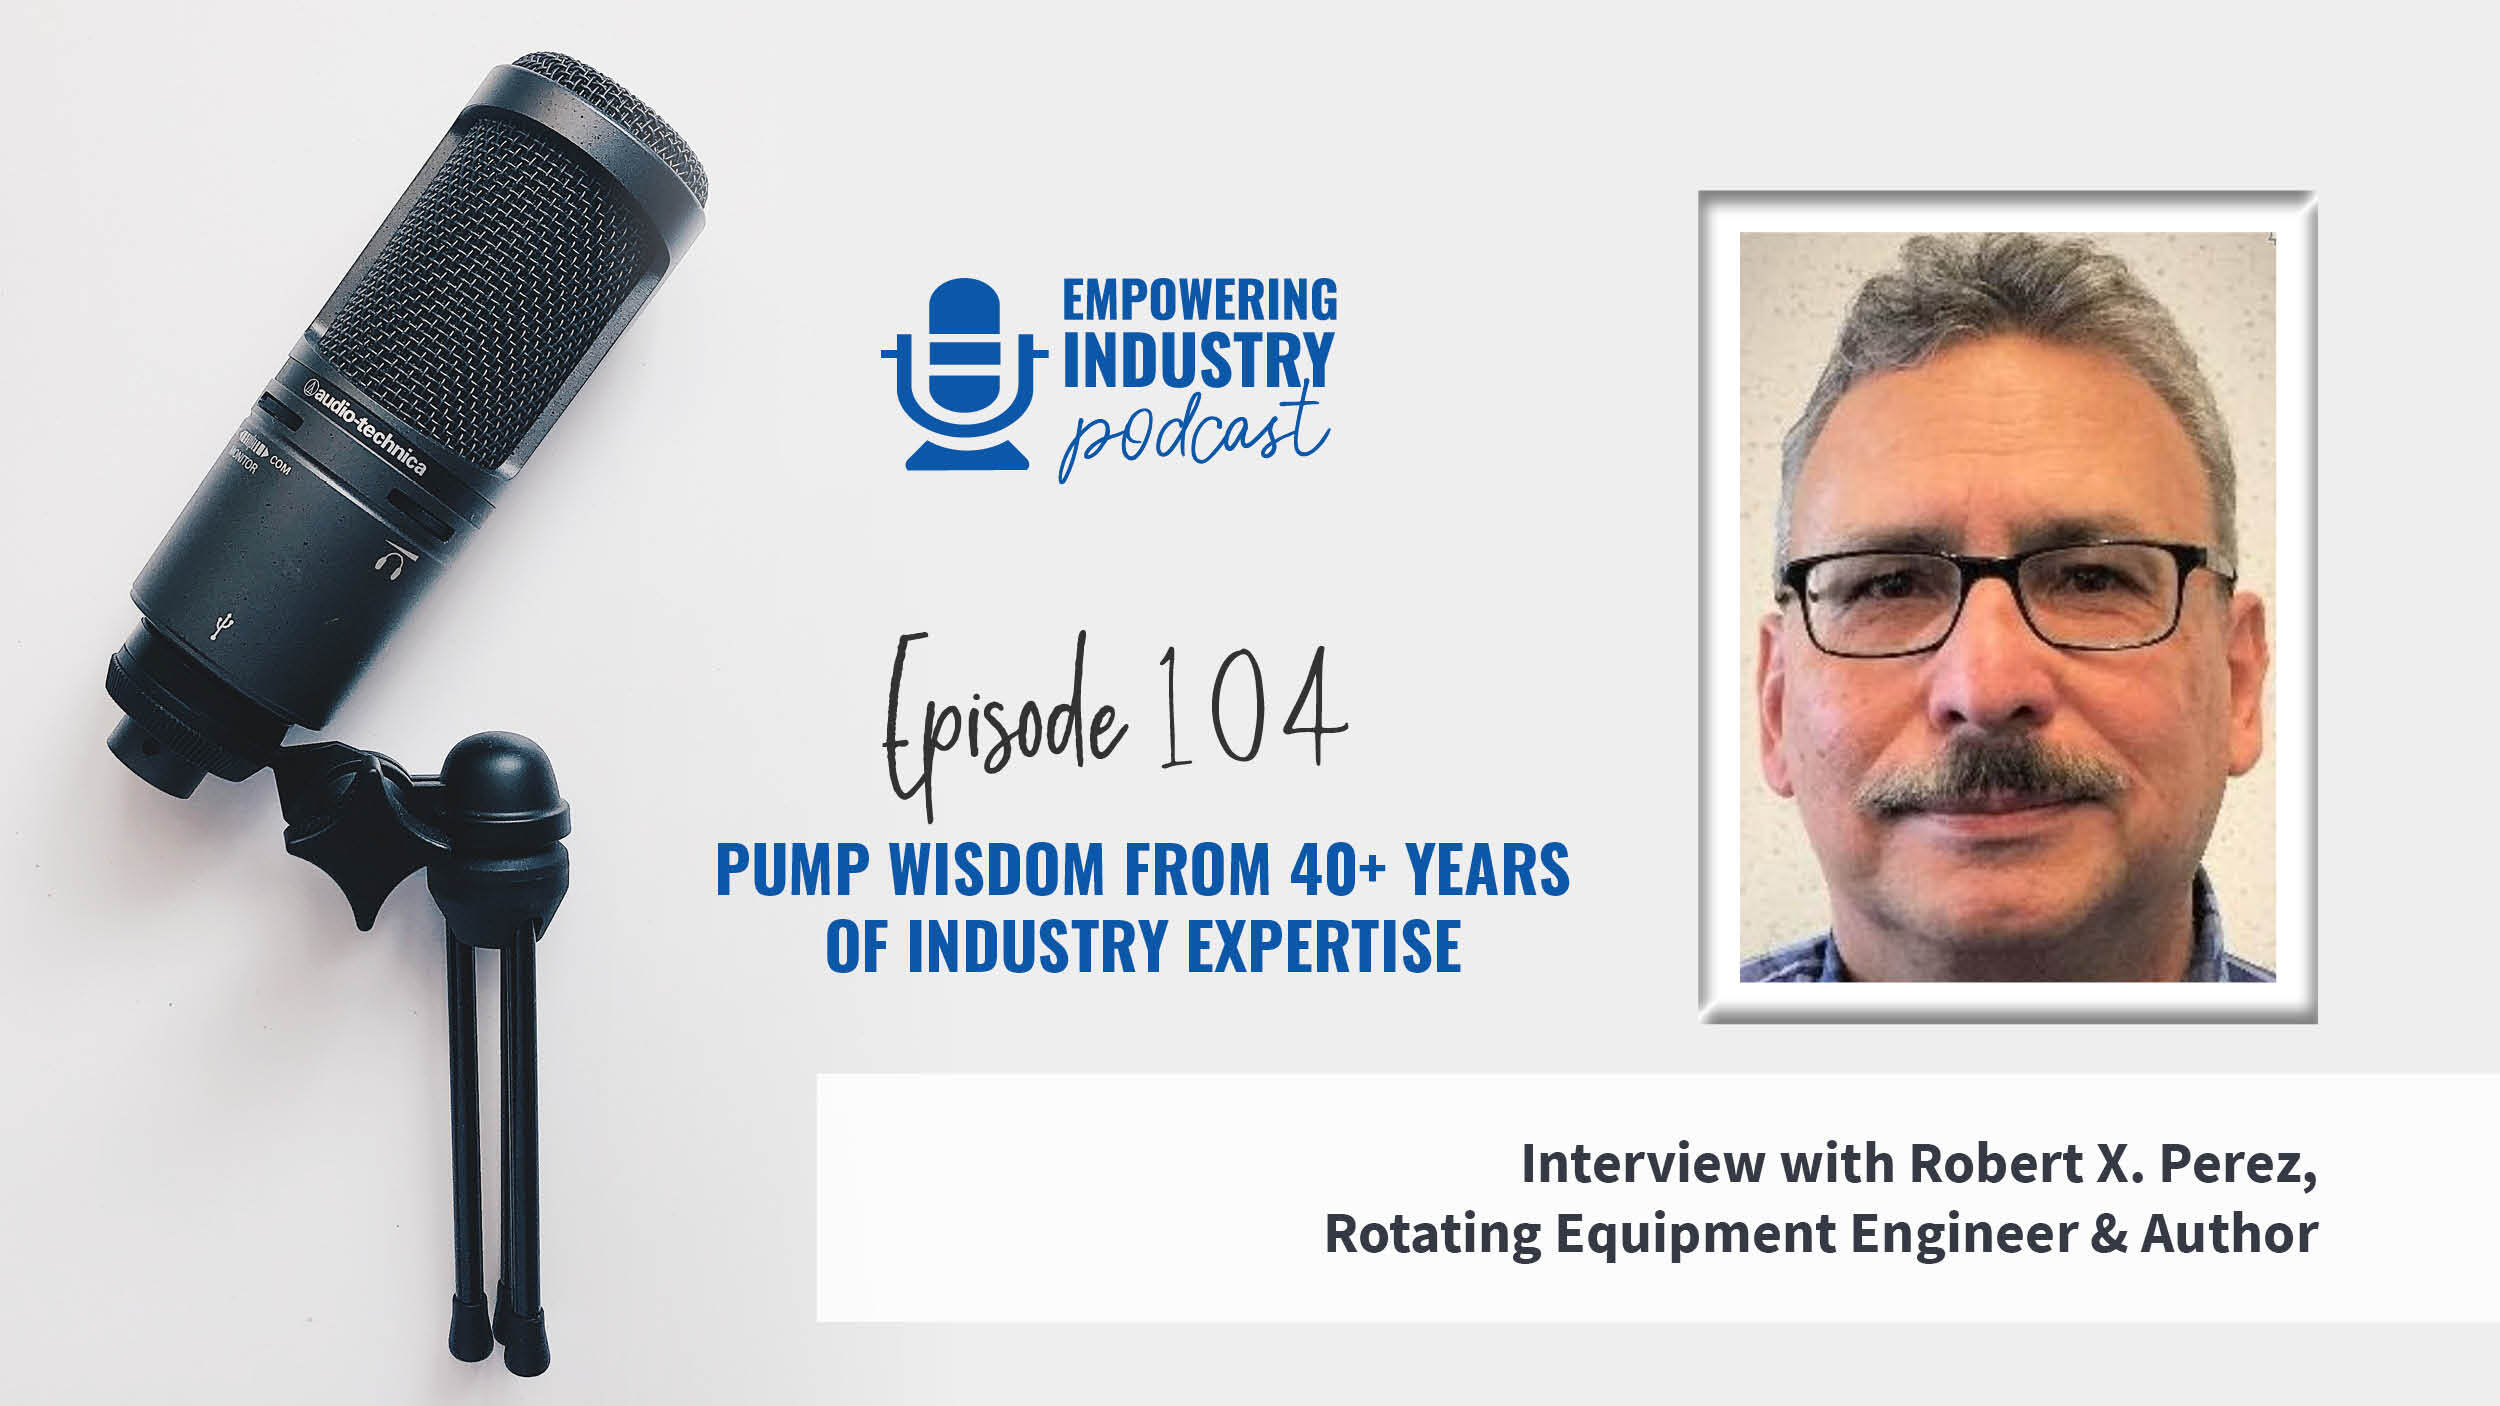 Pump Wisdom From 40+ Years of Industry Expertise With Robert Perez